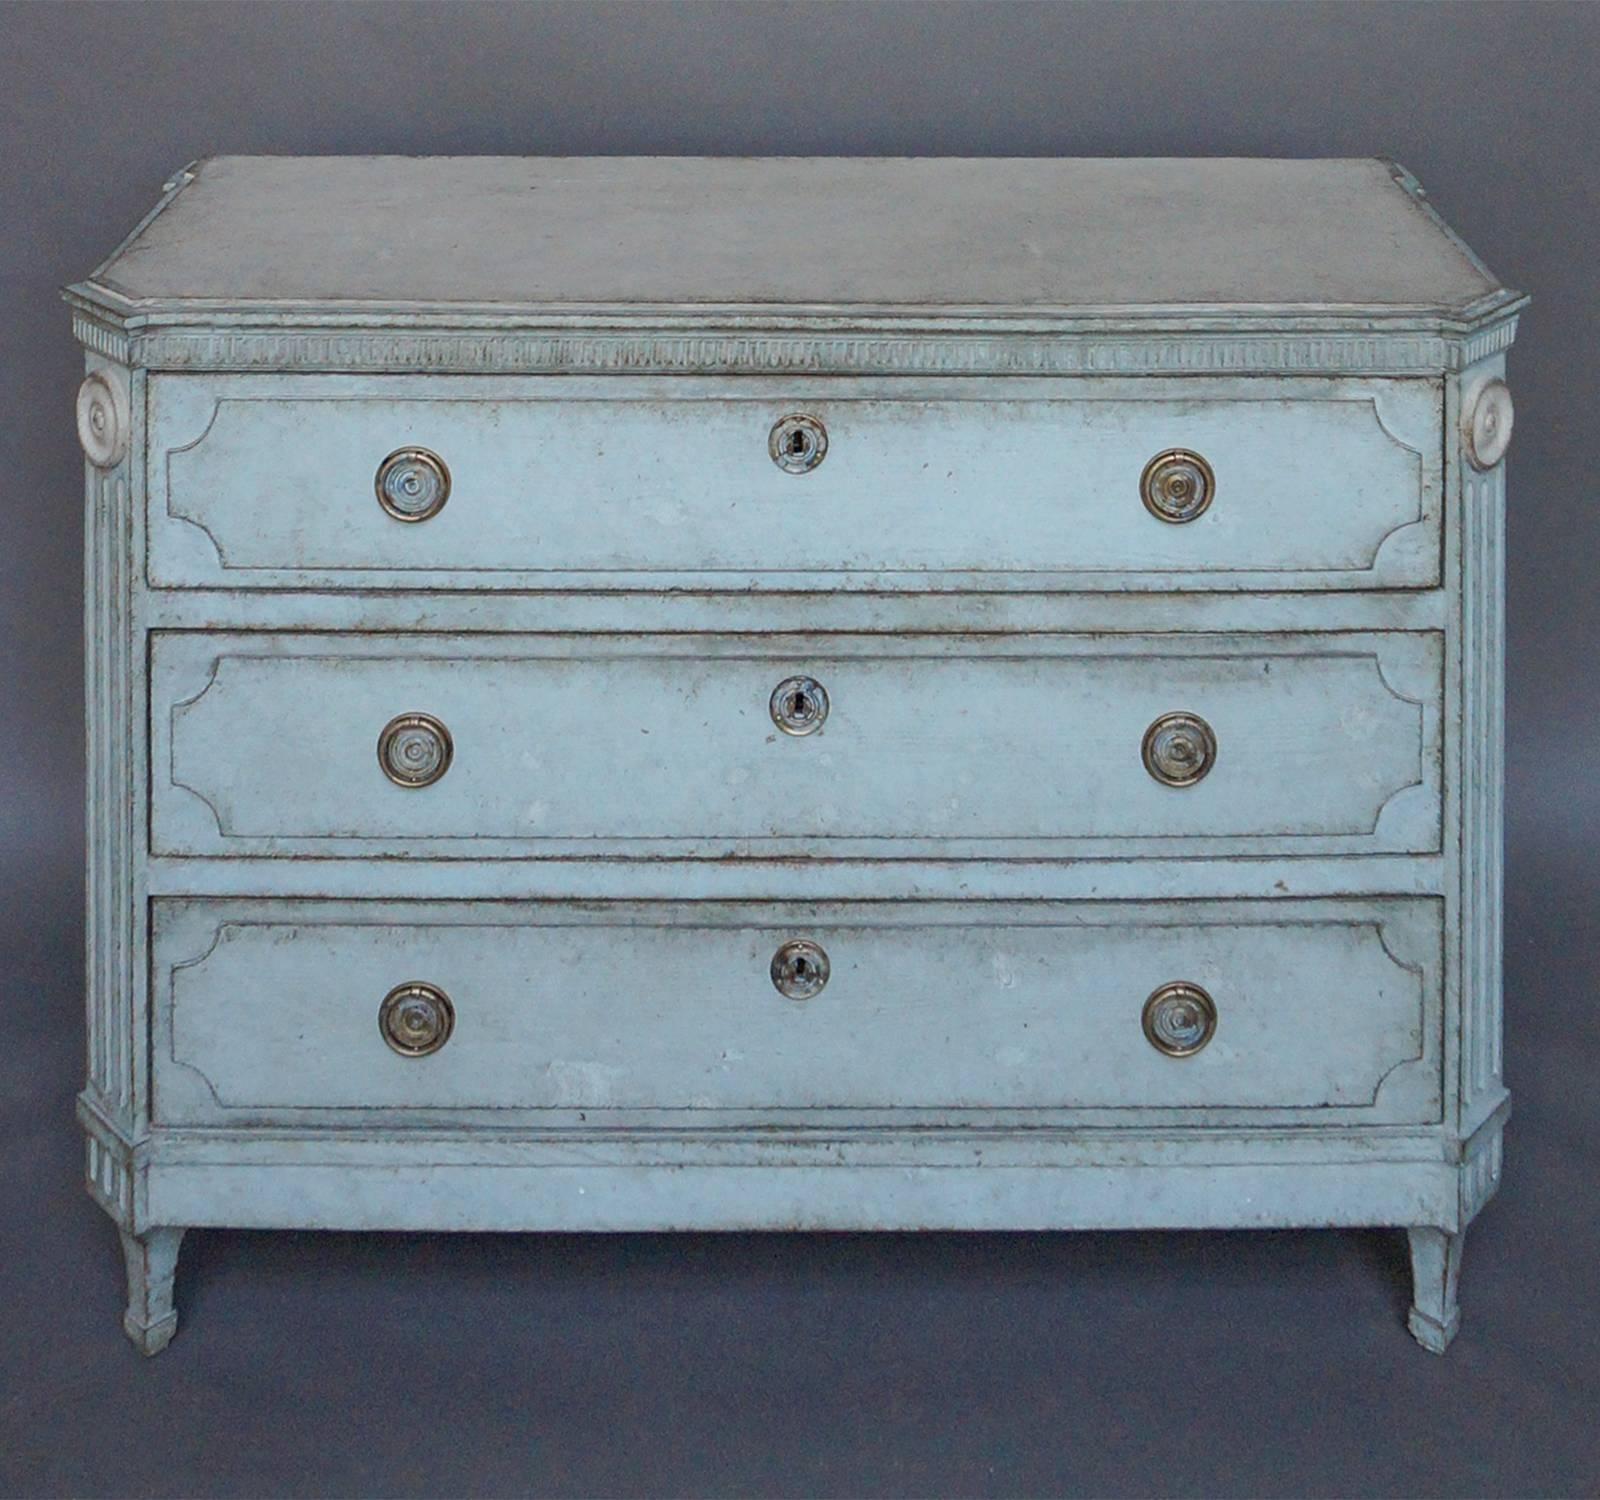 Chest of three drawers, Sweden, circa 1840, in pale blue paint and with a reeded panel under the shaped top, canted corner posts with fluting and raised panels on each drawer front. Brass pulls and escutcheons.